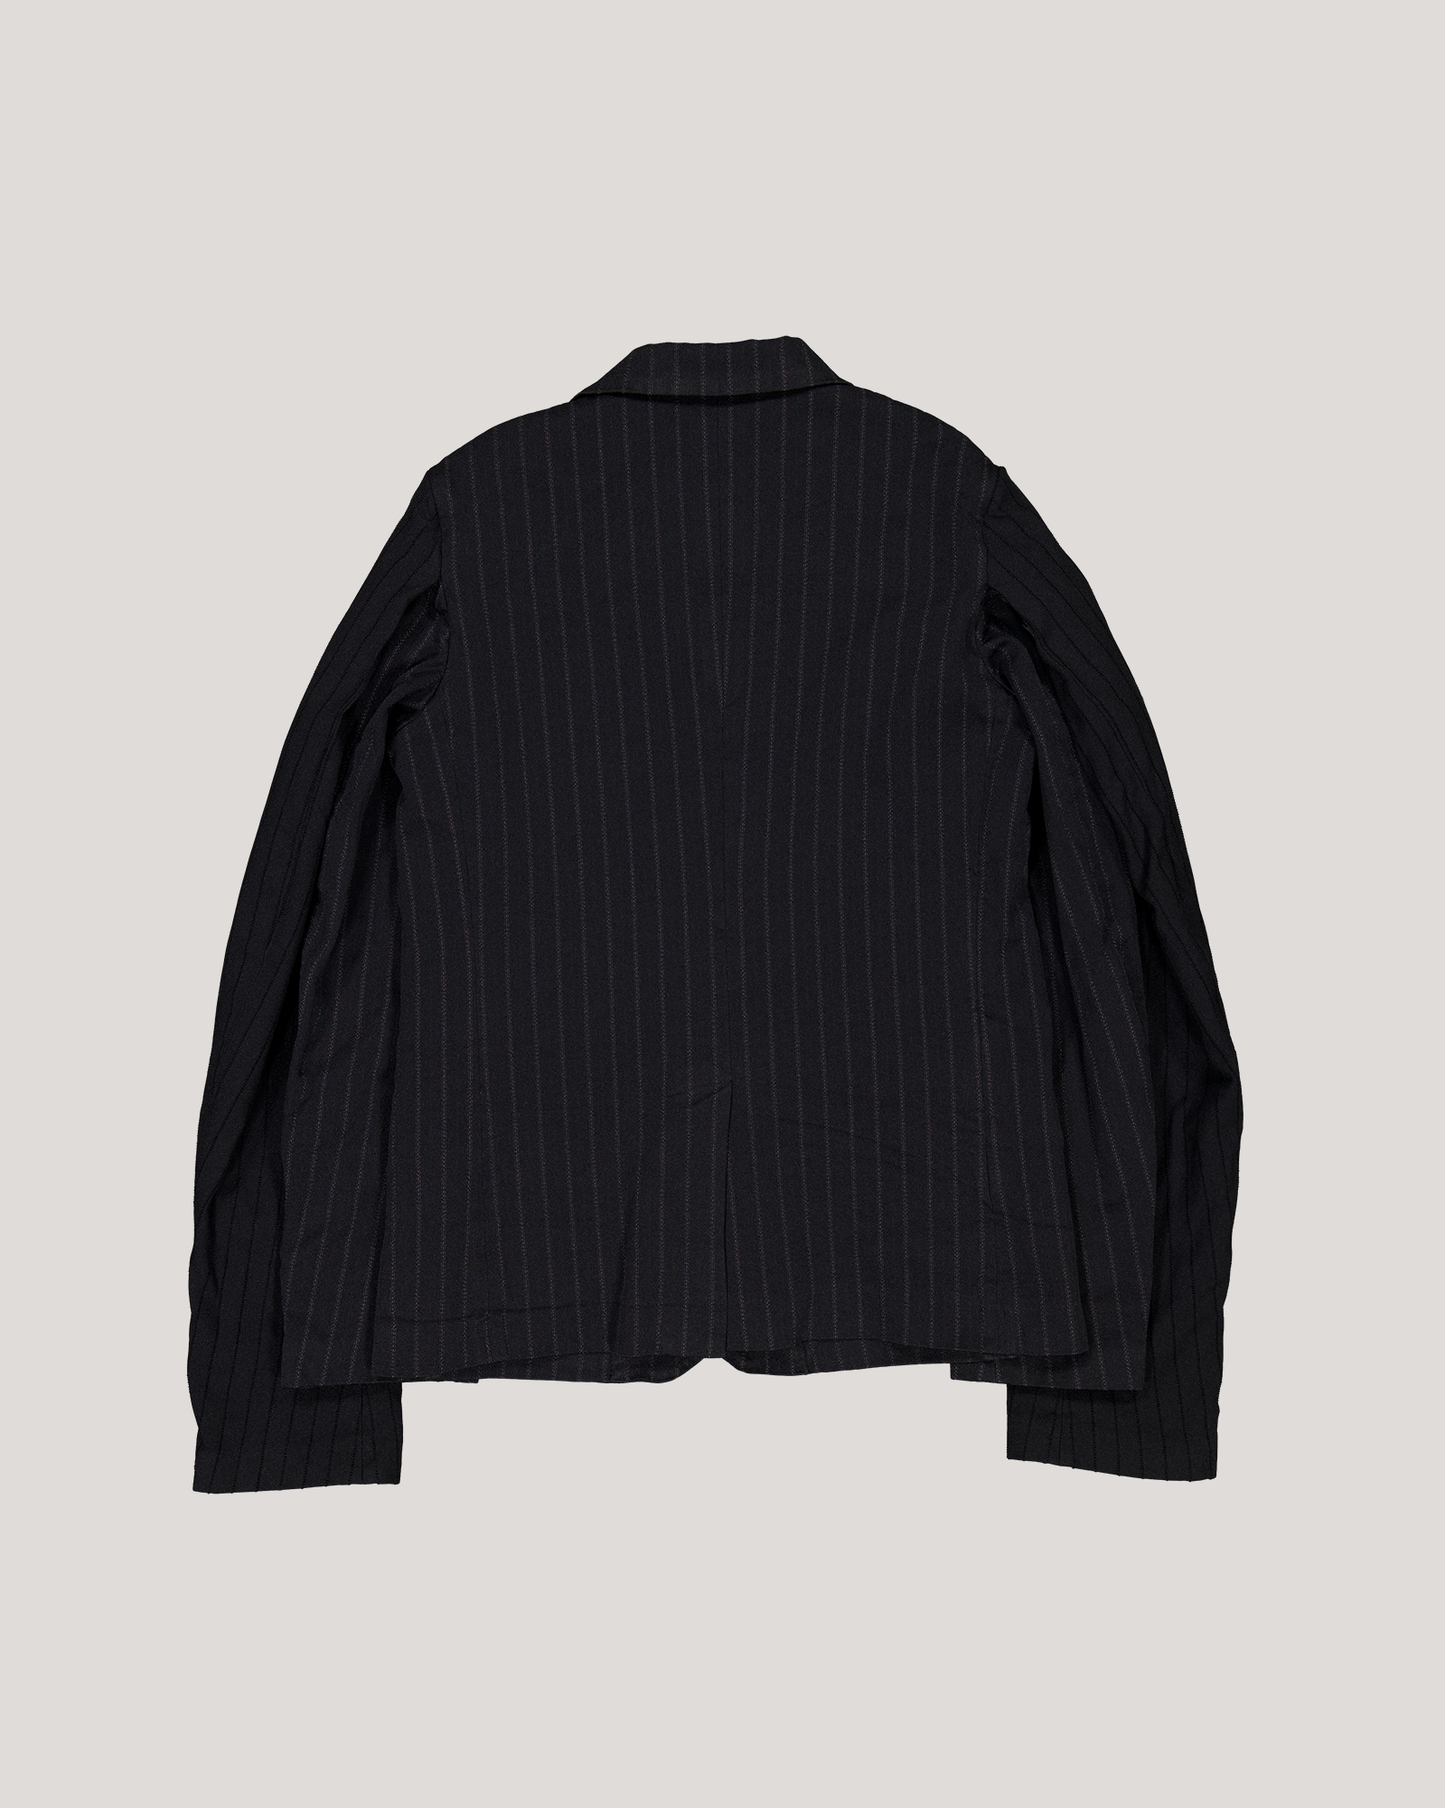 CDG BLACK DOUBLE SLEEVE STRIPED TAILORED JACKET